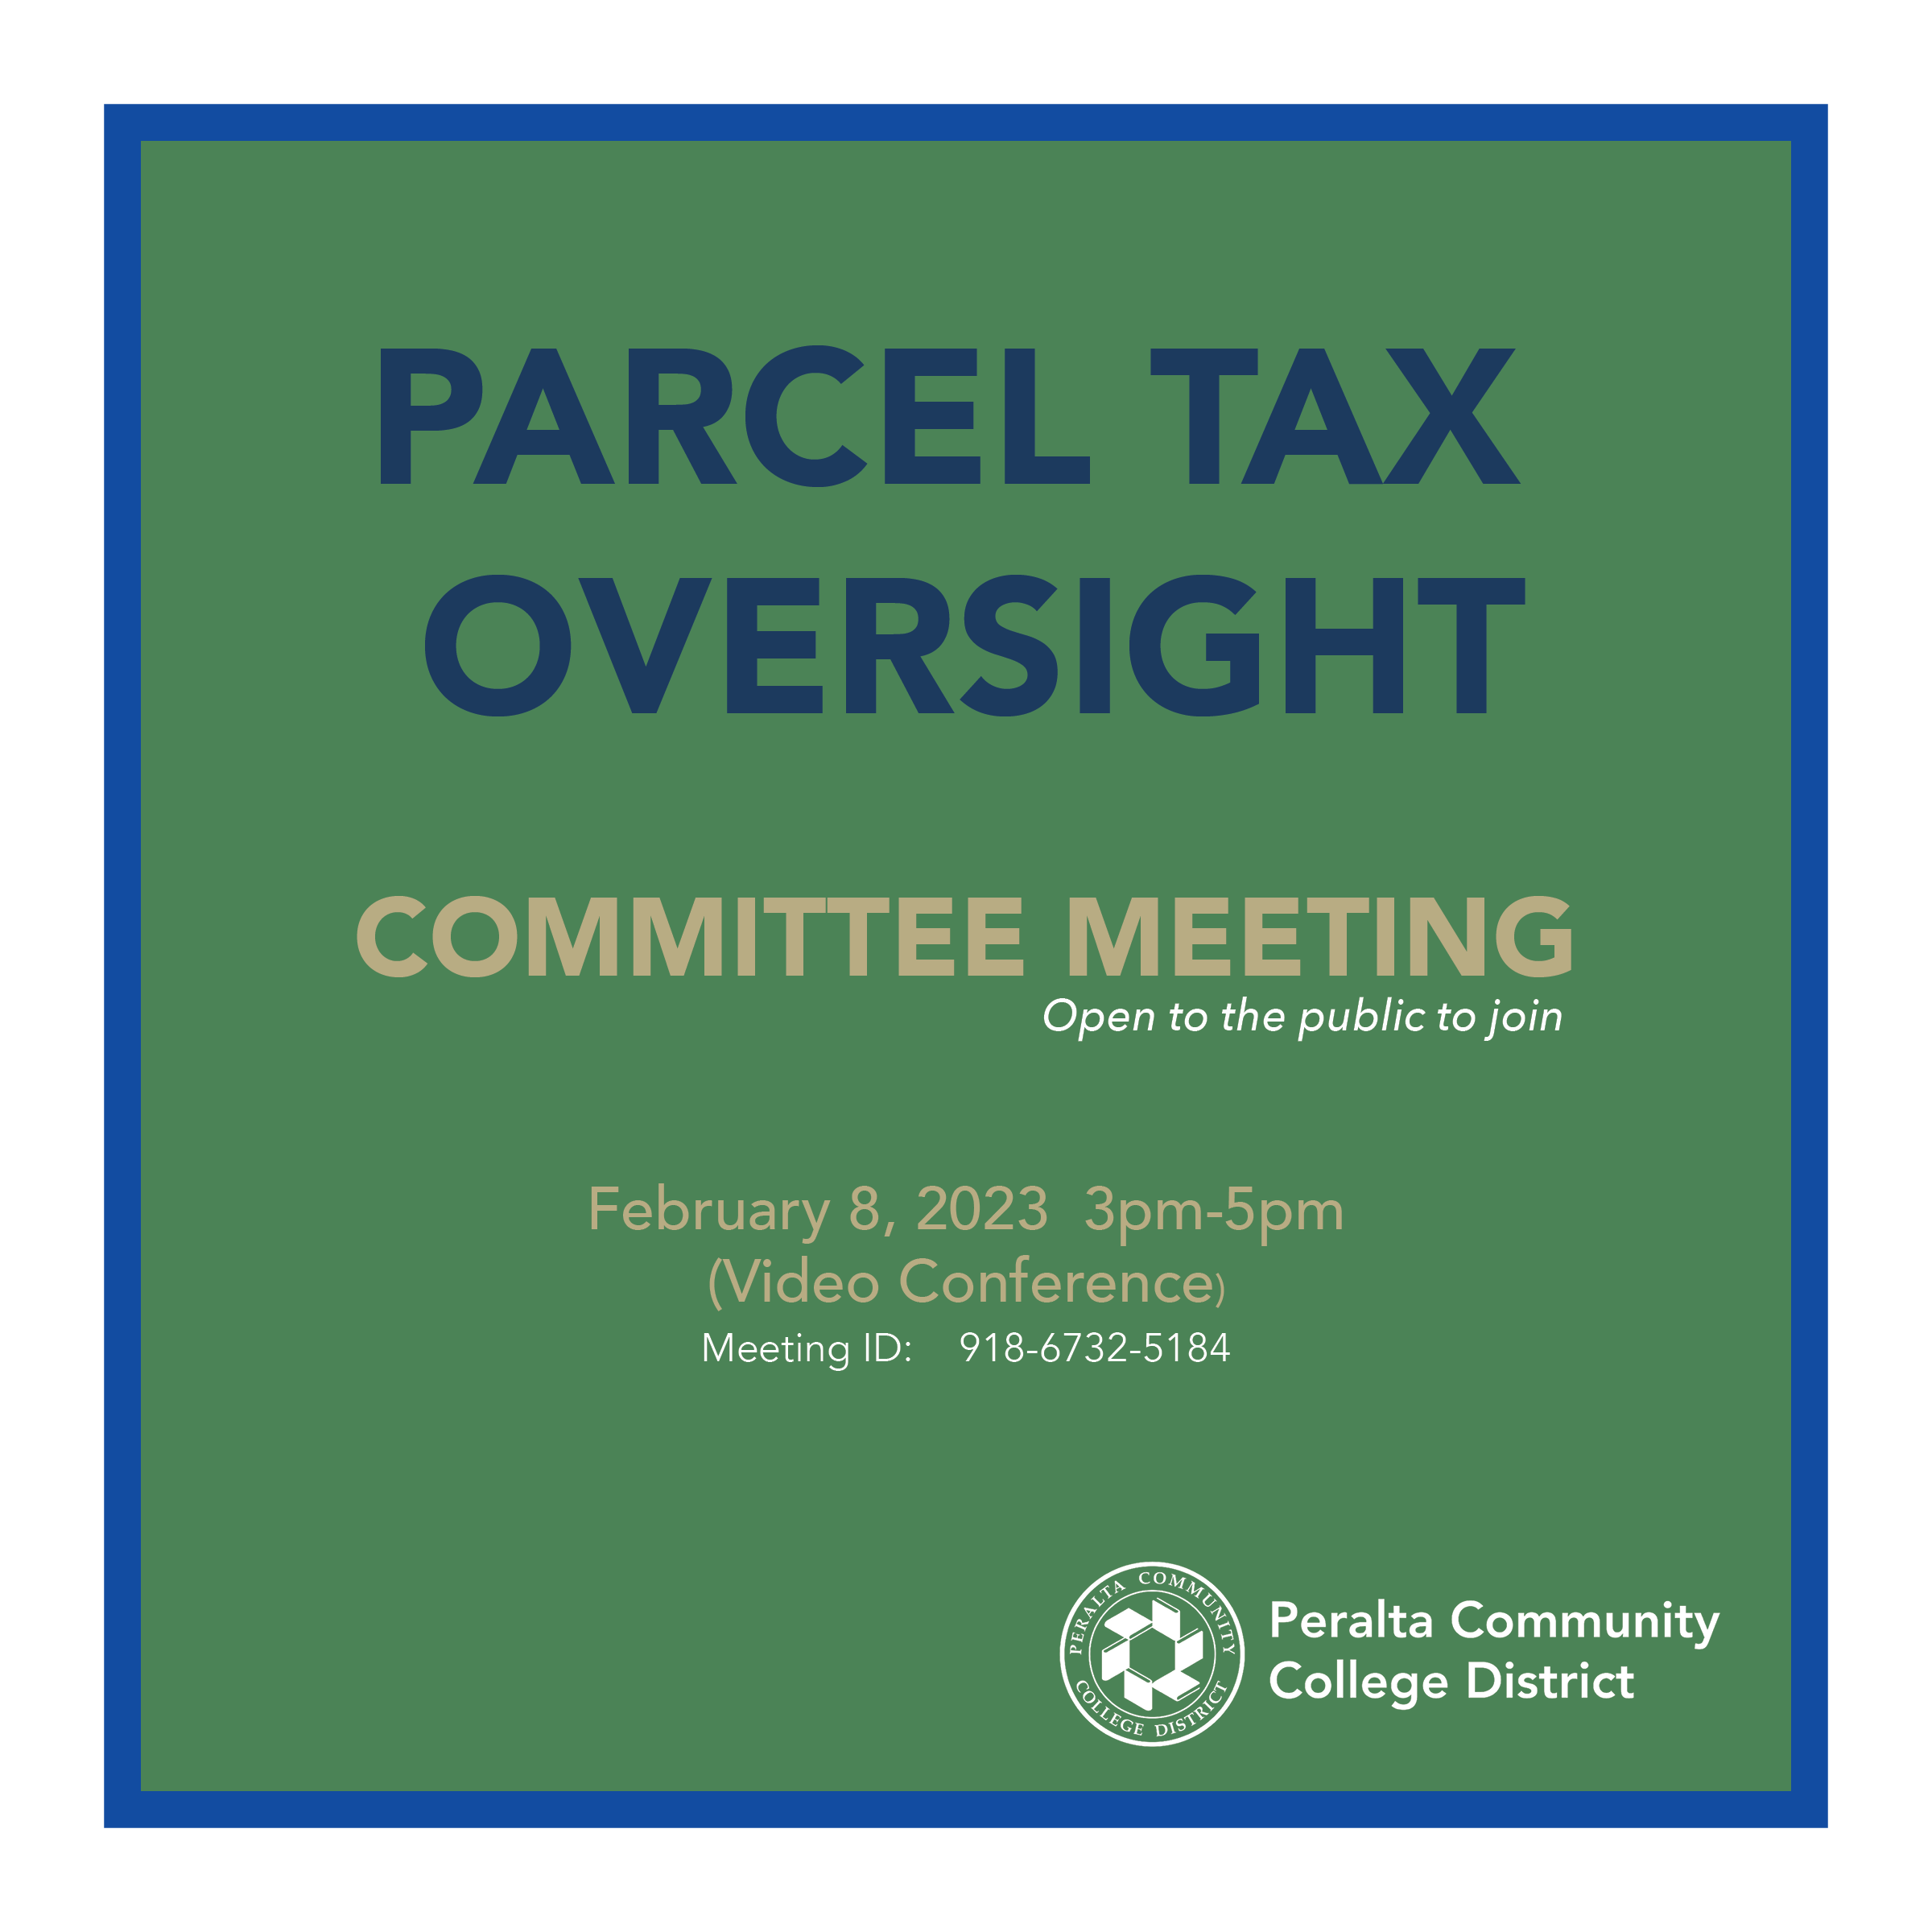 Parcel Tax Oversight Committee Meeting - Wednesday, February 8, 2023 at 3-00 pm - Video Conference